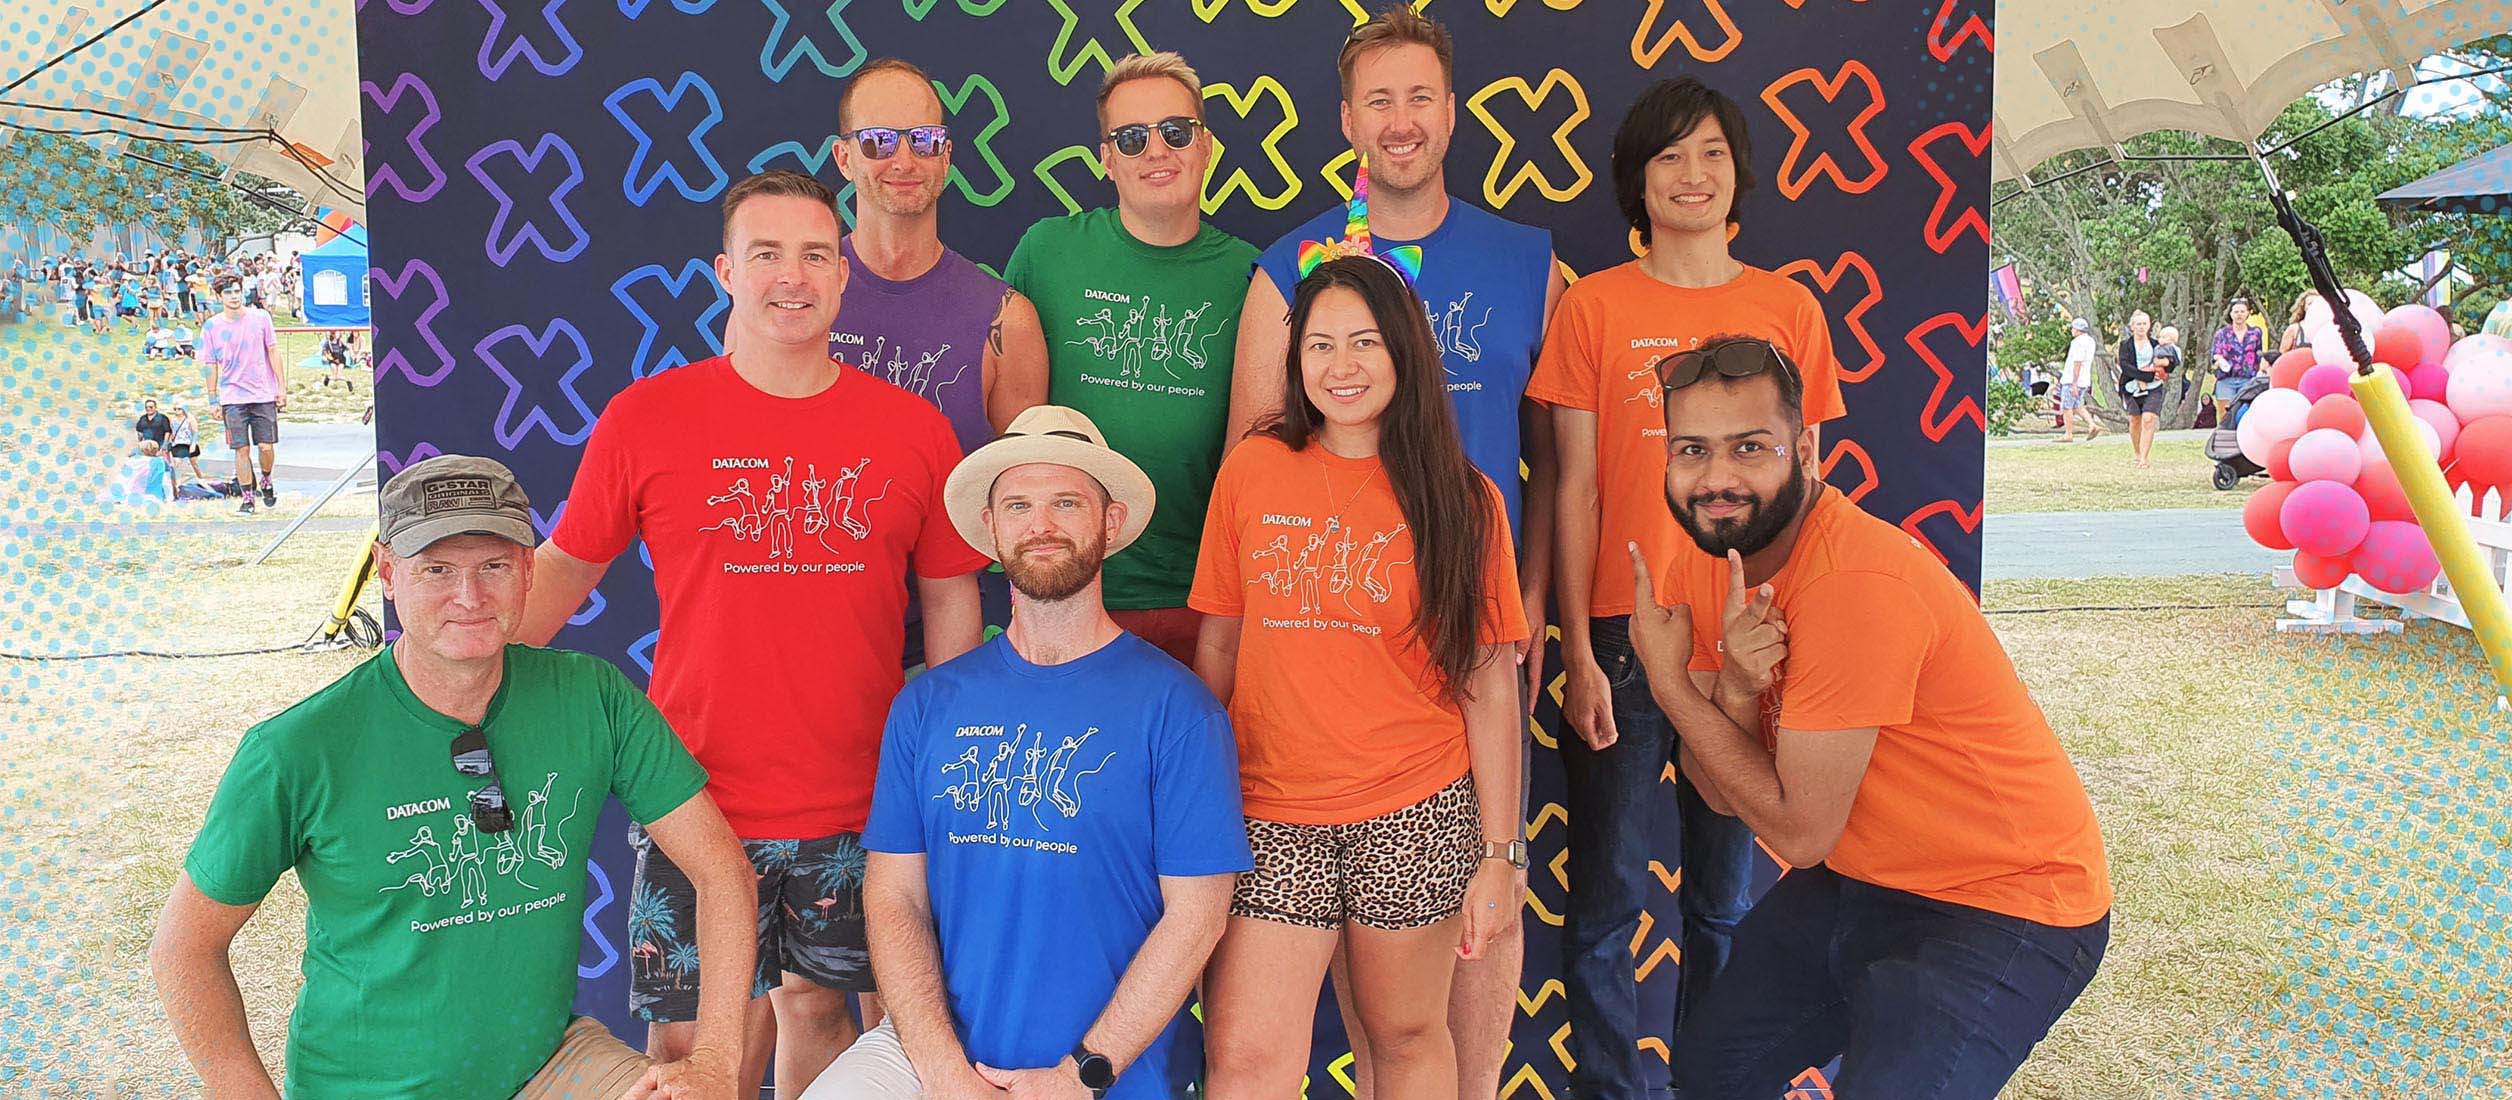 Datacom team photo during the set up for Big Gay Out